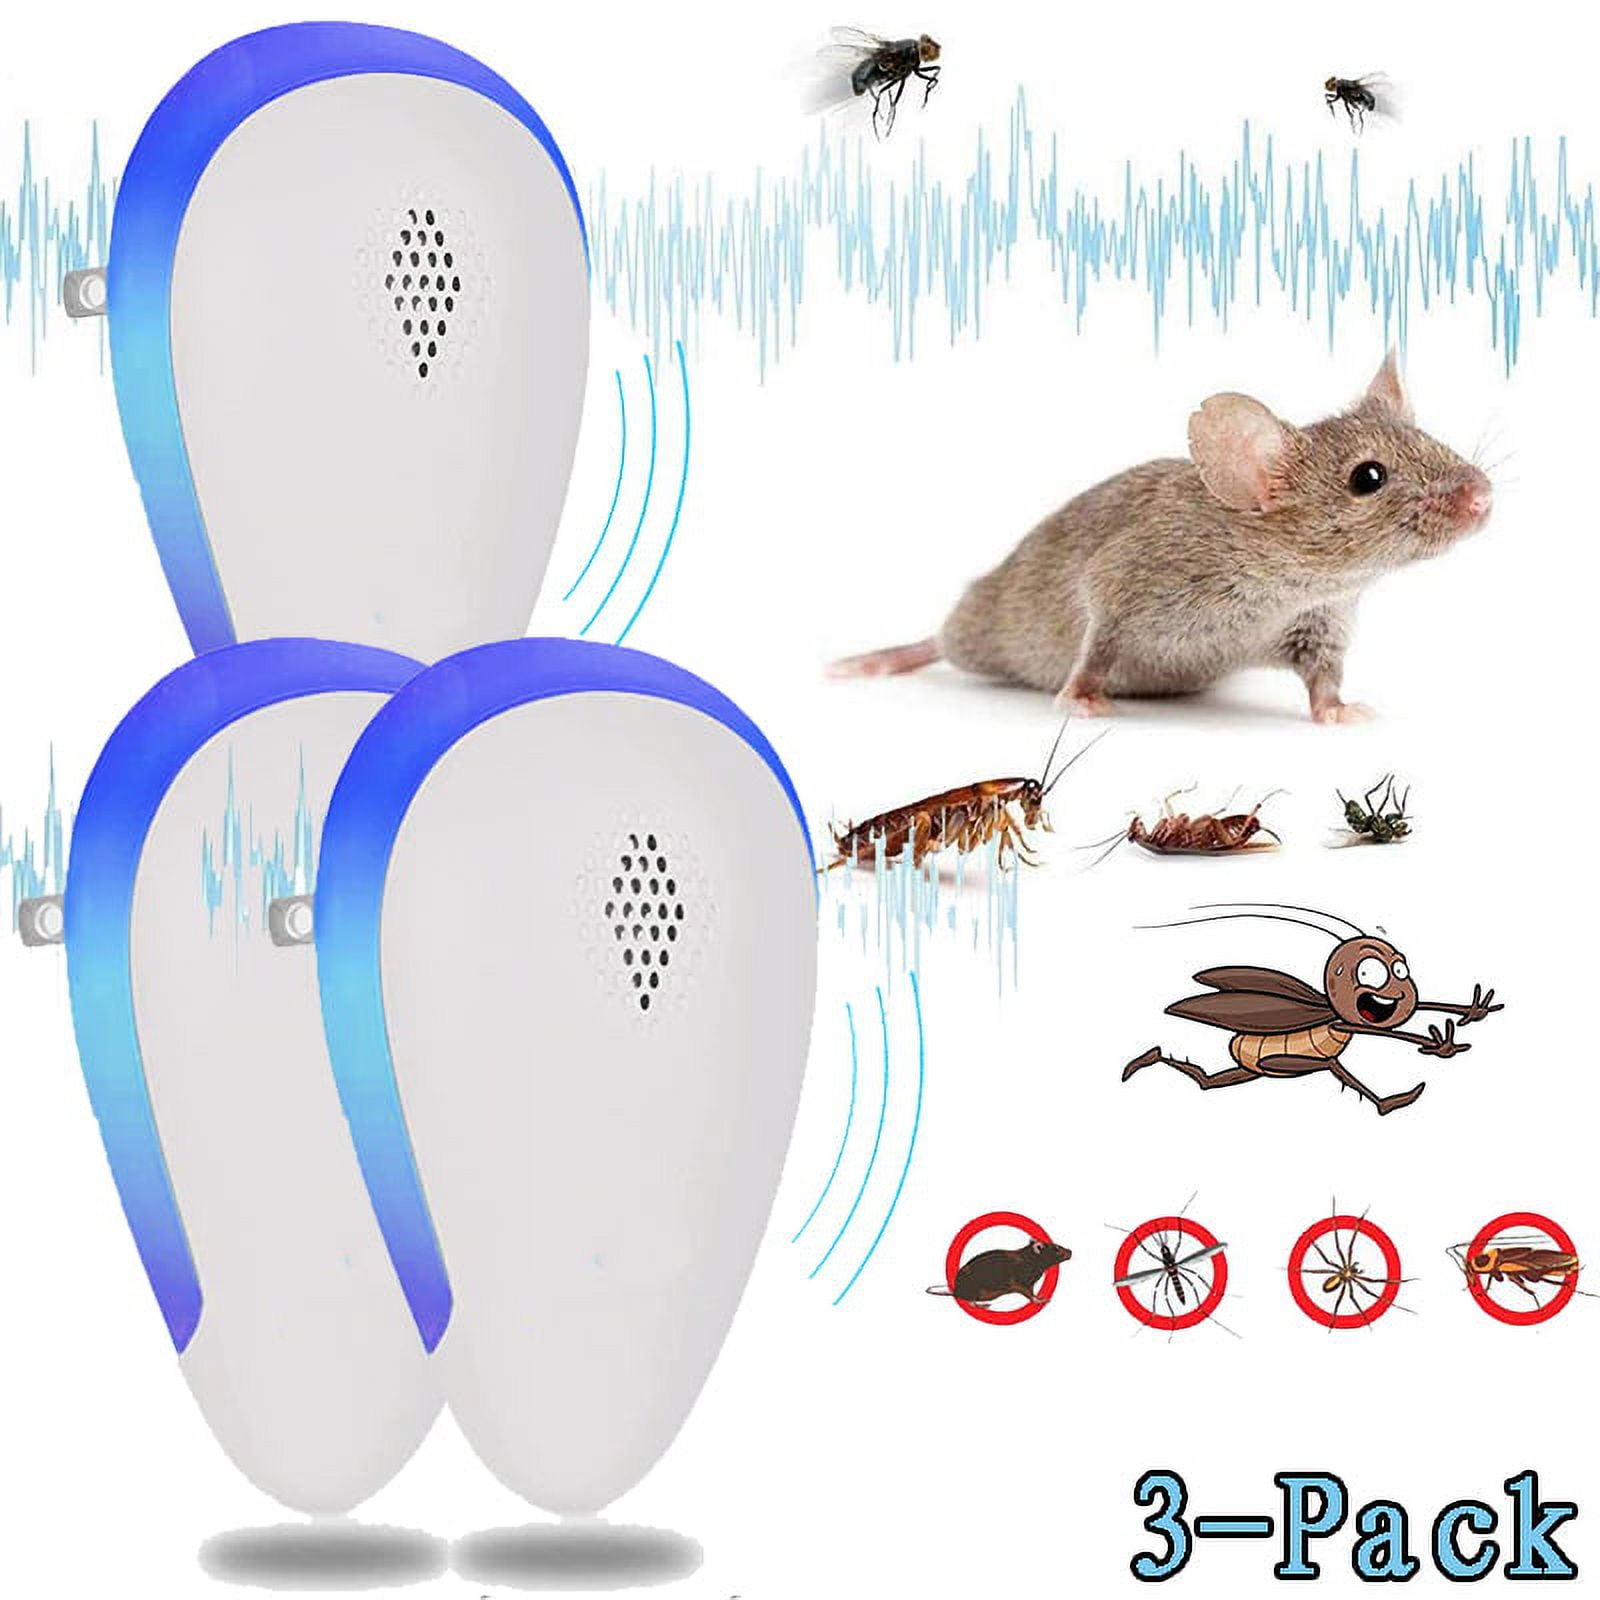 Elbourn Ultrasonic Pest Repeller 3 Pack, Electronic Insect Repellent  Plug-in, Pest Control for Insects, Roach, Bug, Mole 